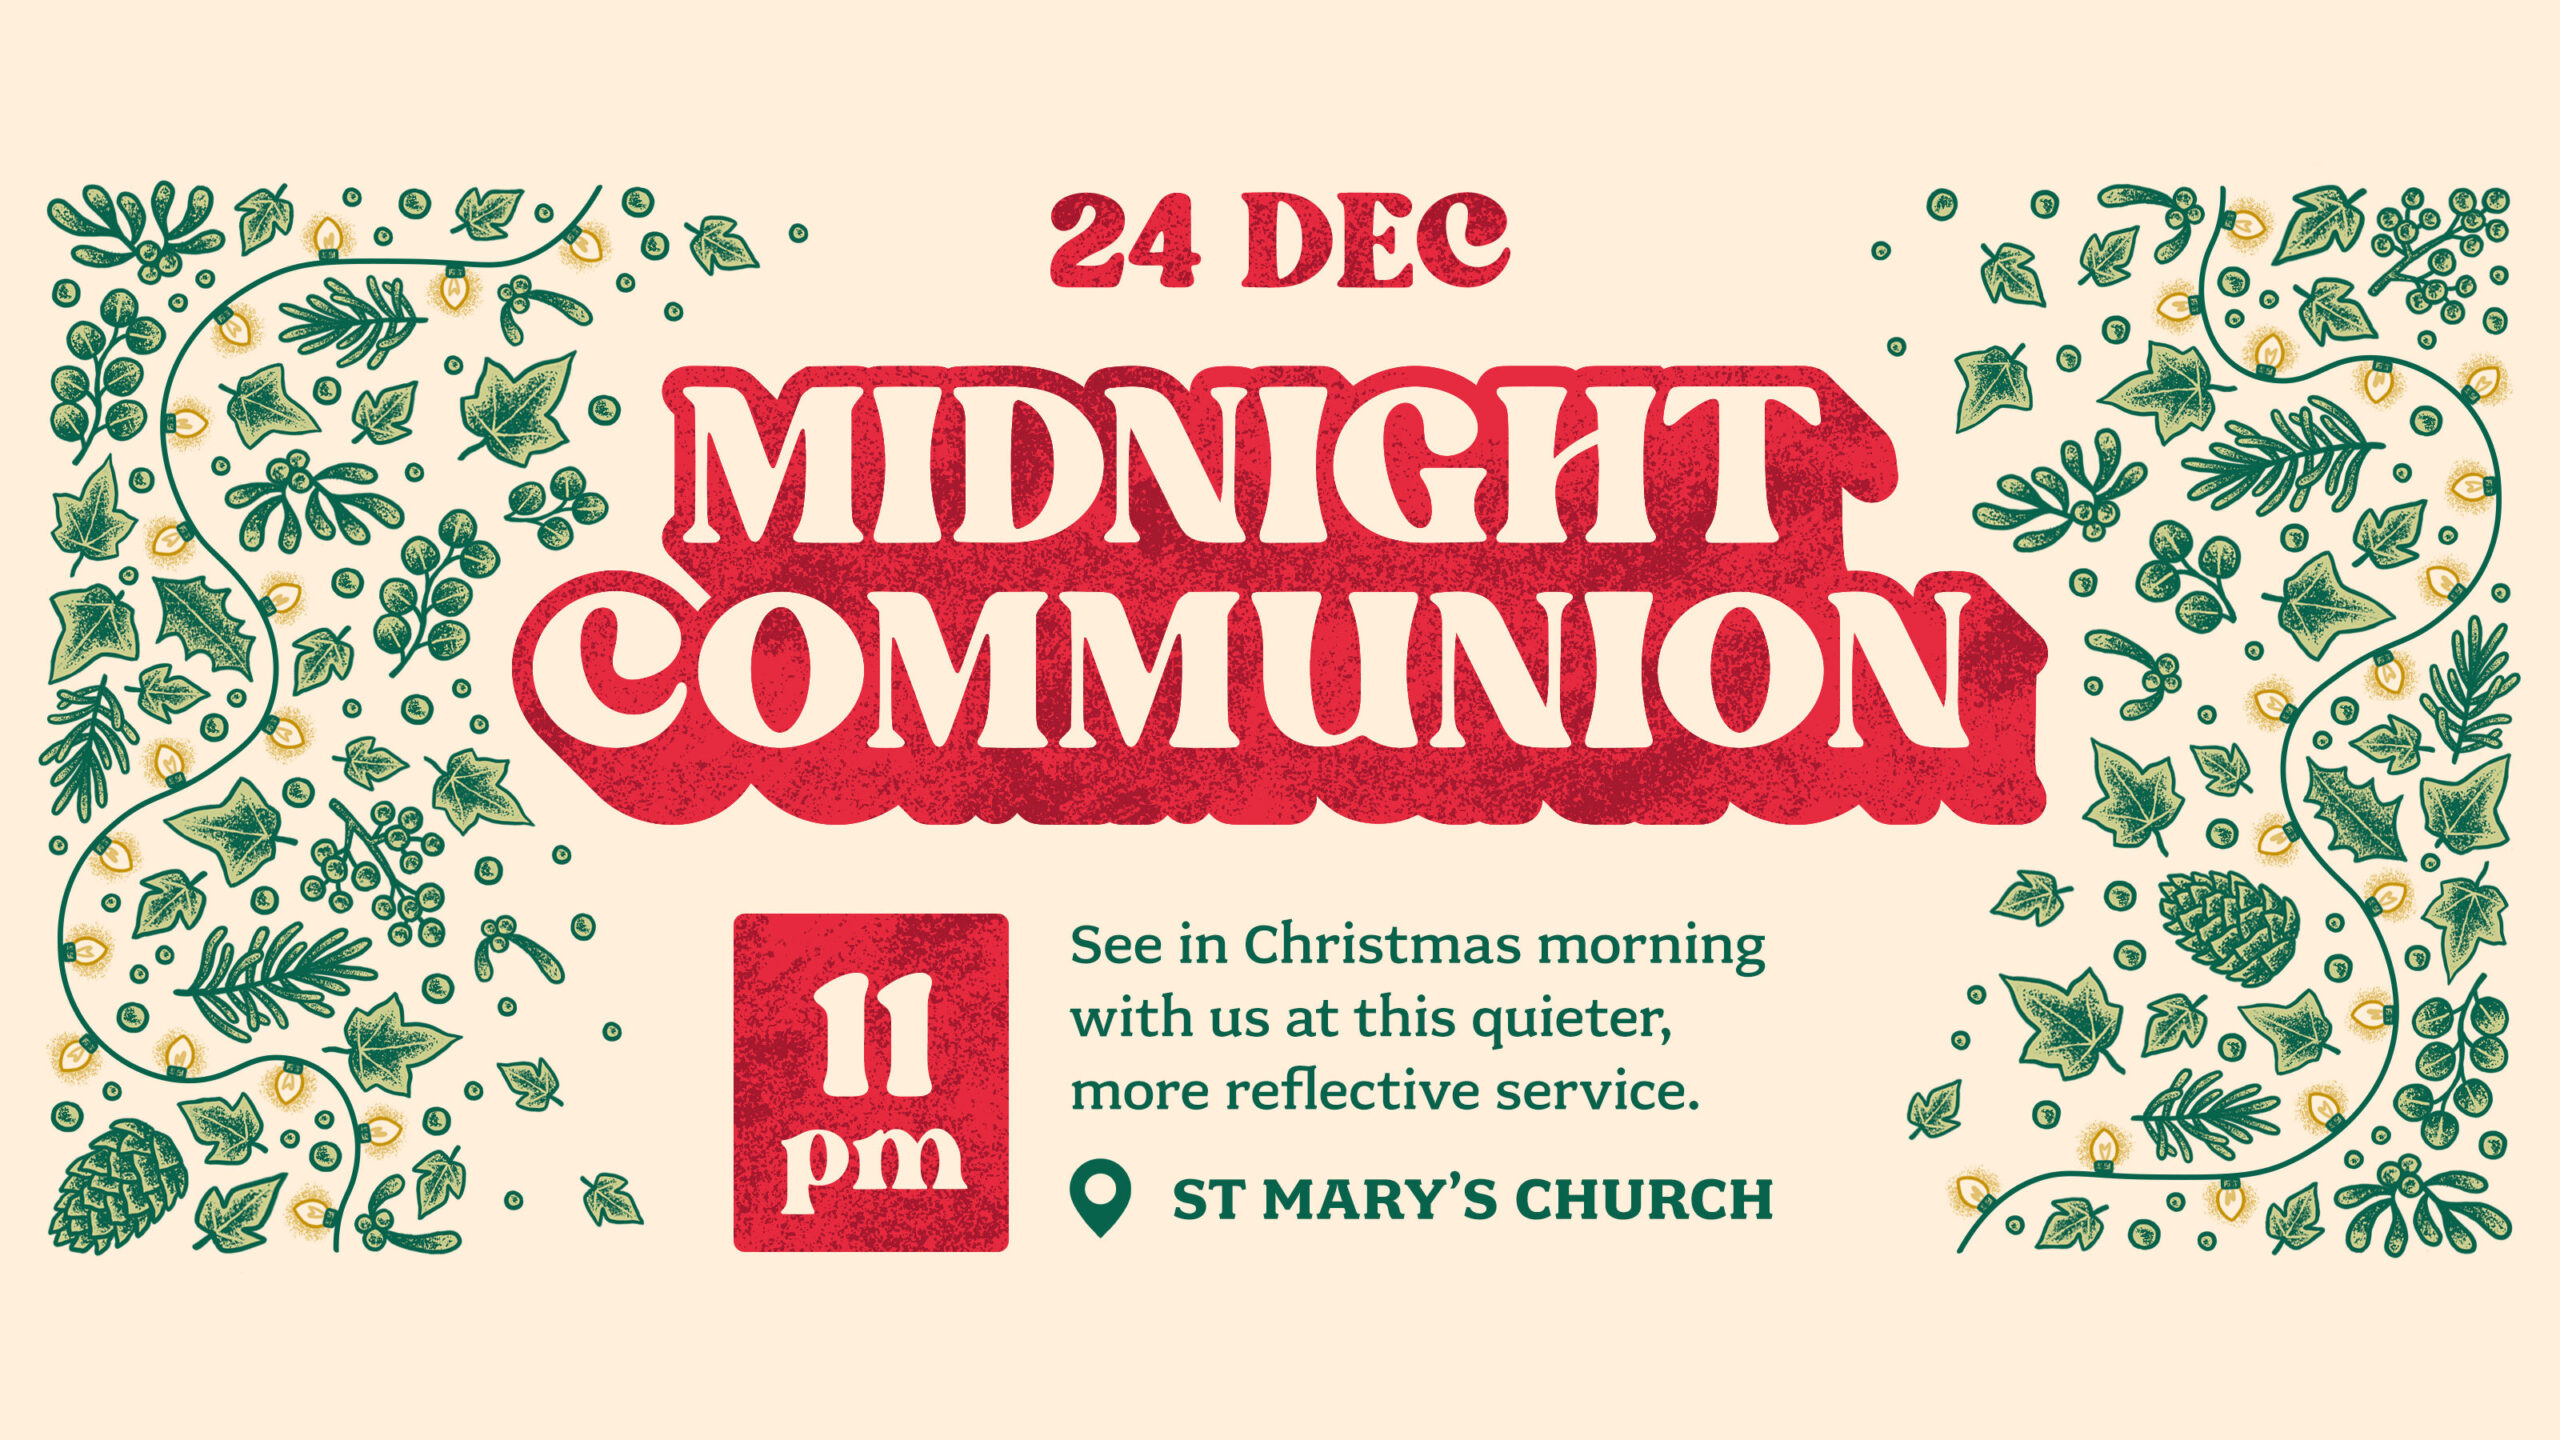 24 Dec, 11pm
Midnight Communion
See in Christmas morning with us at this quieter, more reflective service.
St Mary's Church